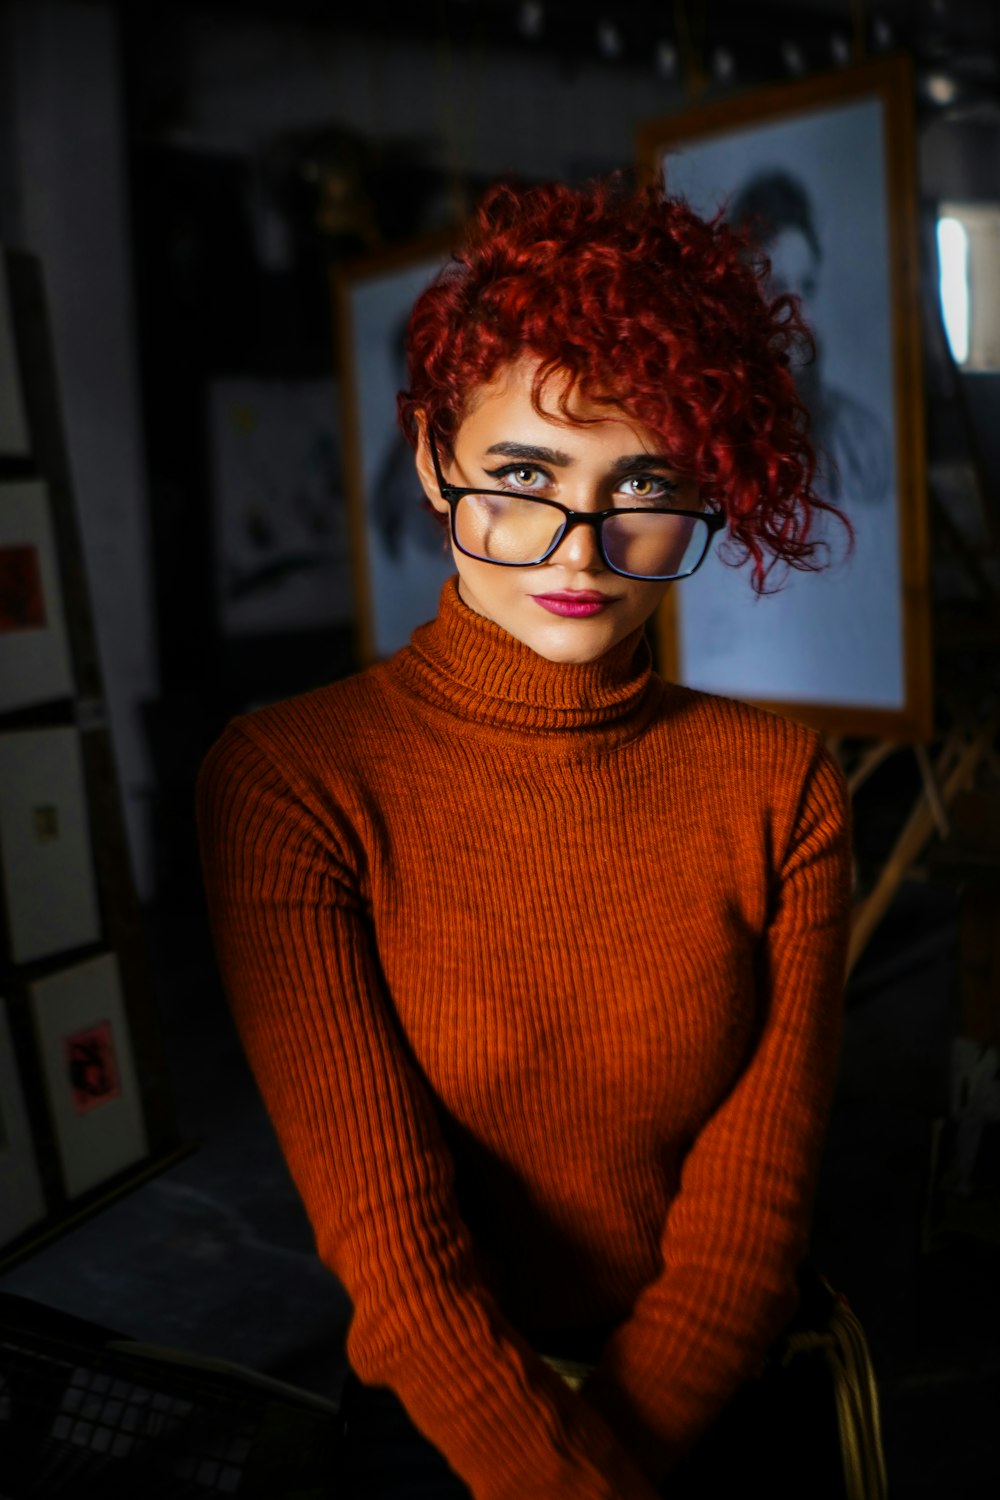 a woman with red hair and glasses posing for a picture